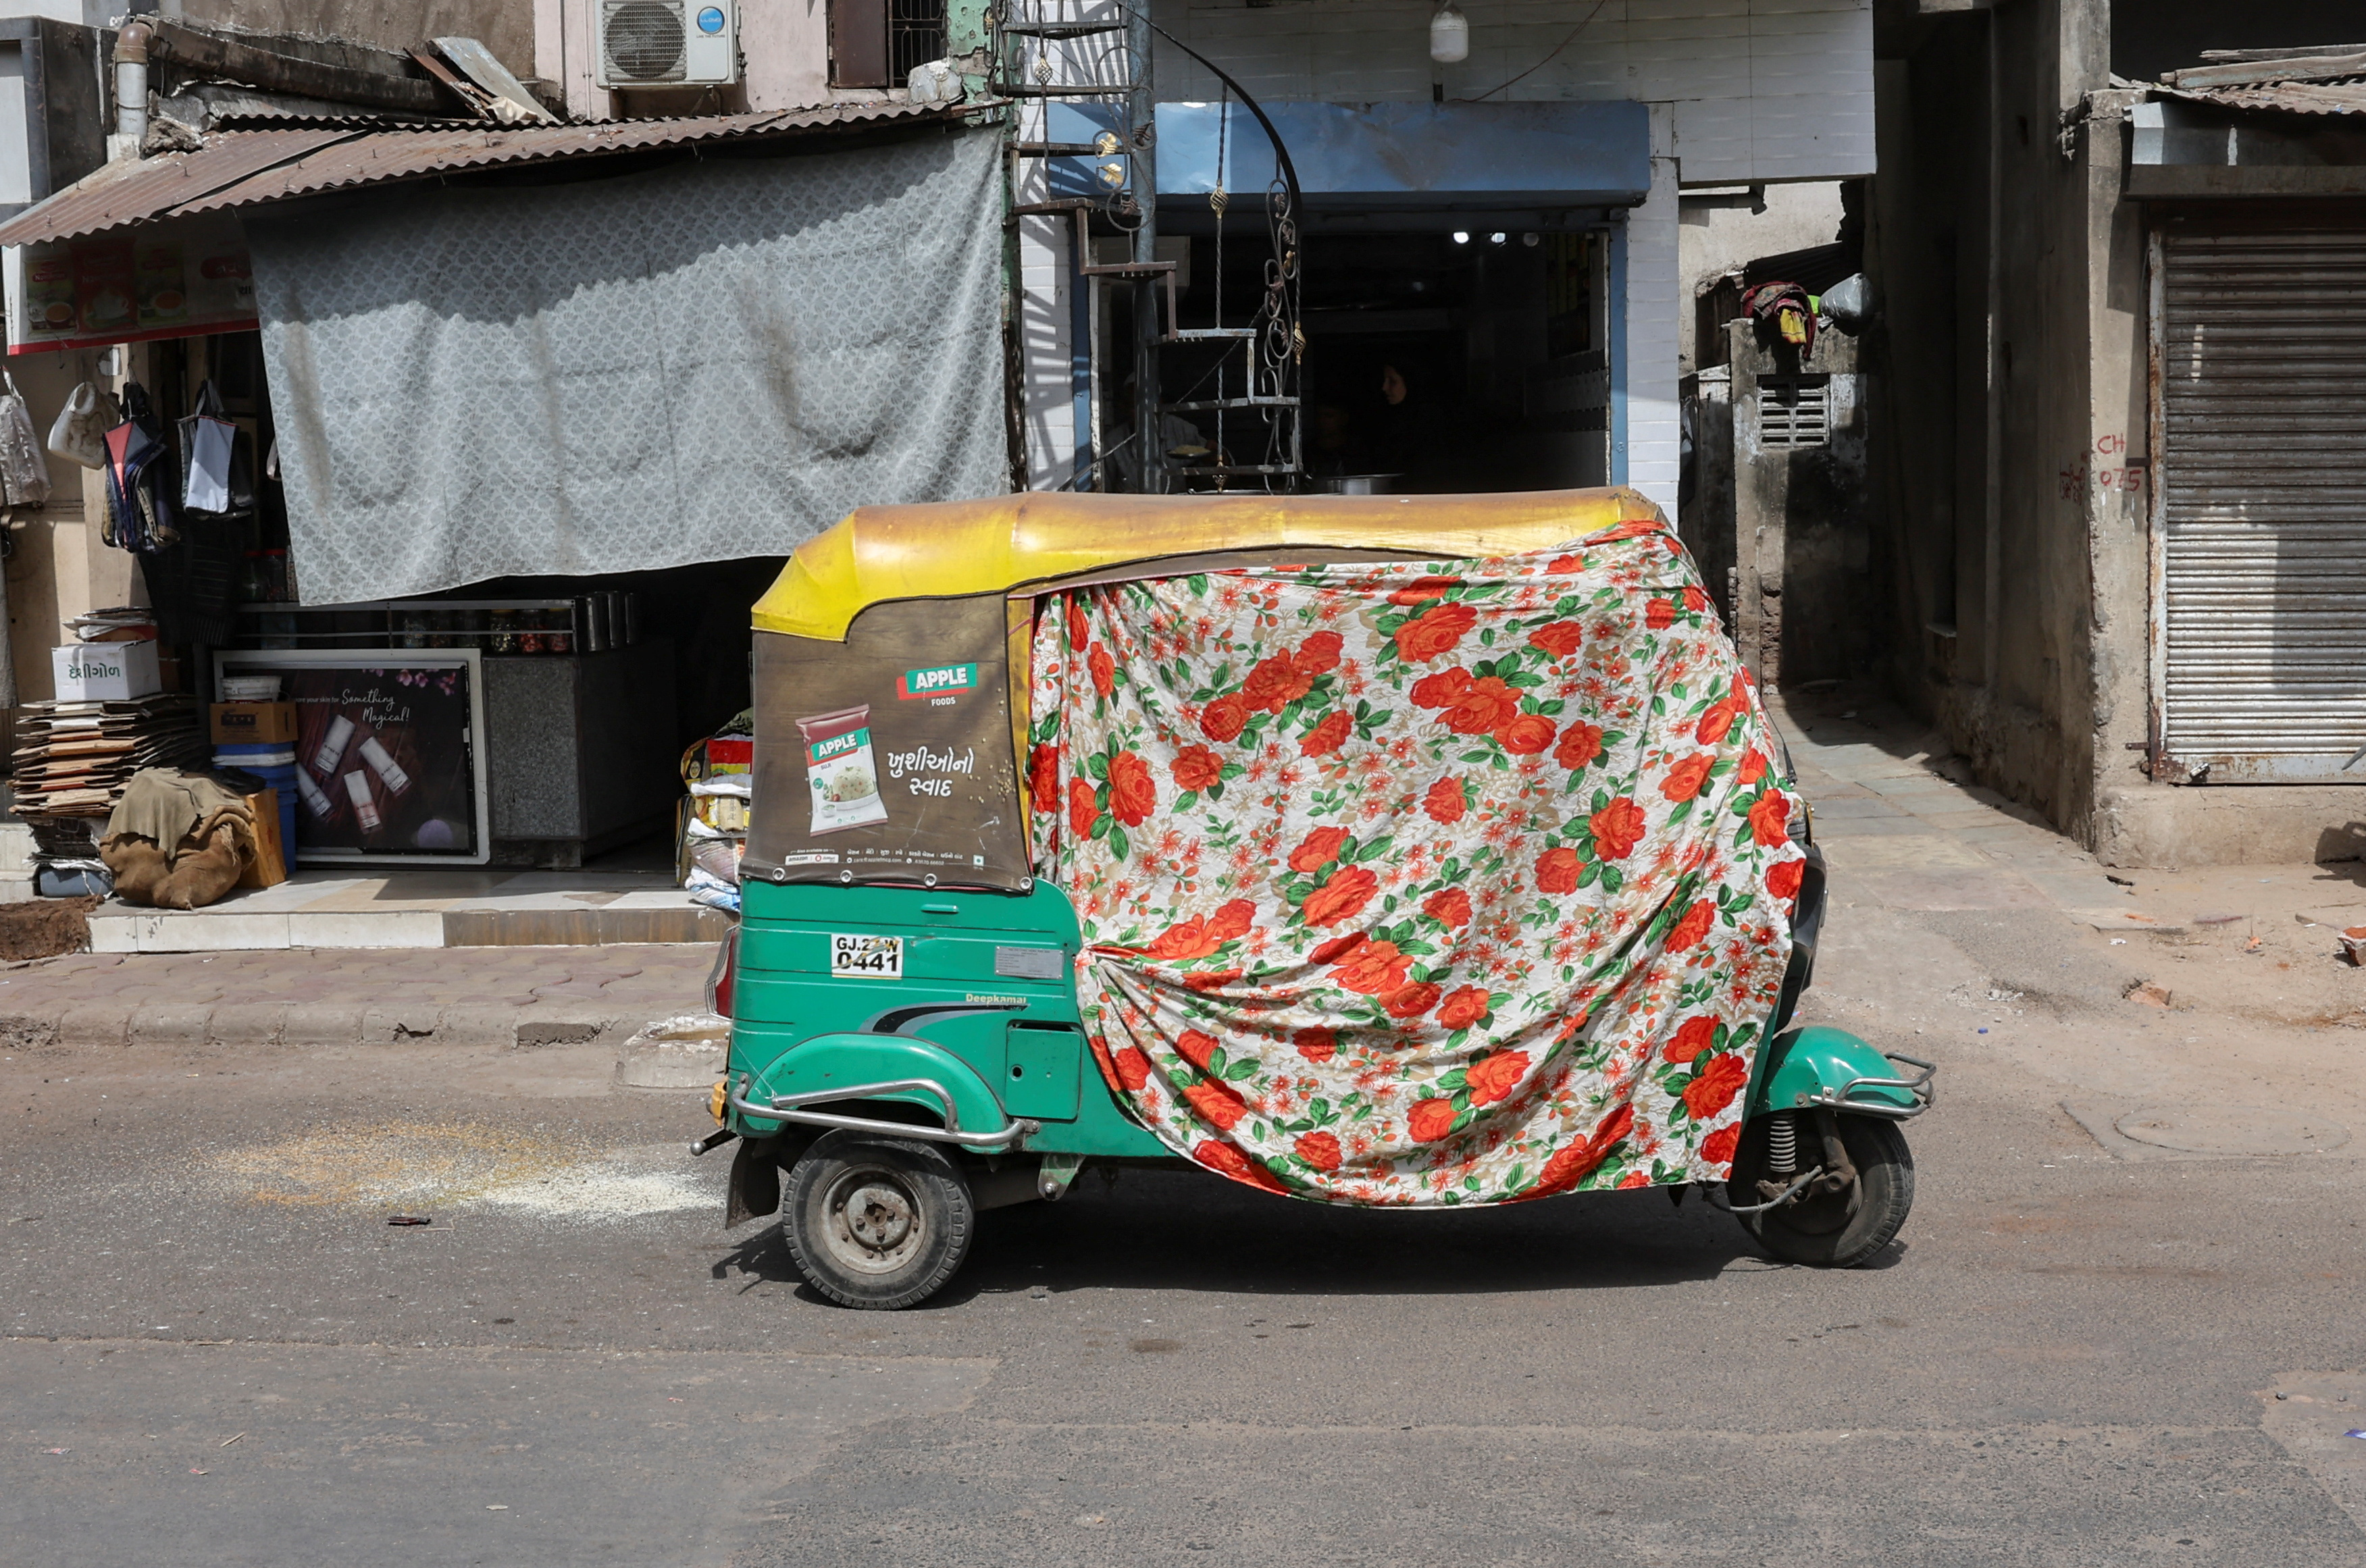 An autorickshaw covered with a cloth is seen on the street during a heat wave in Ahmedabad